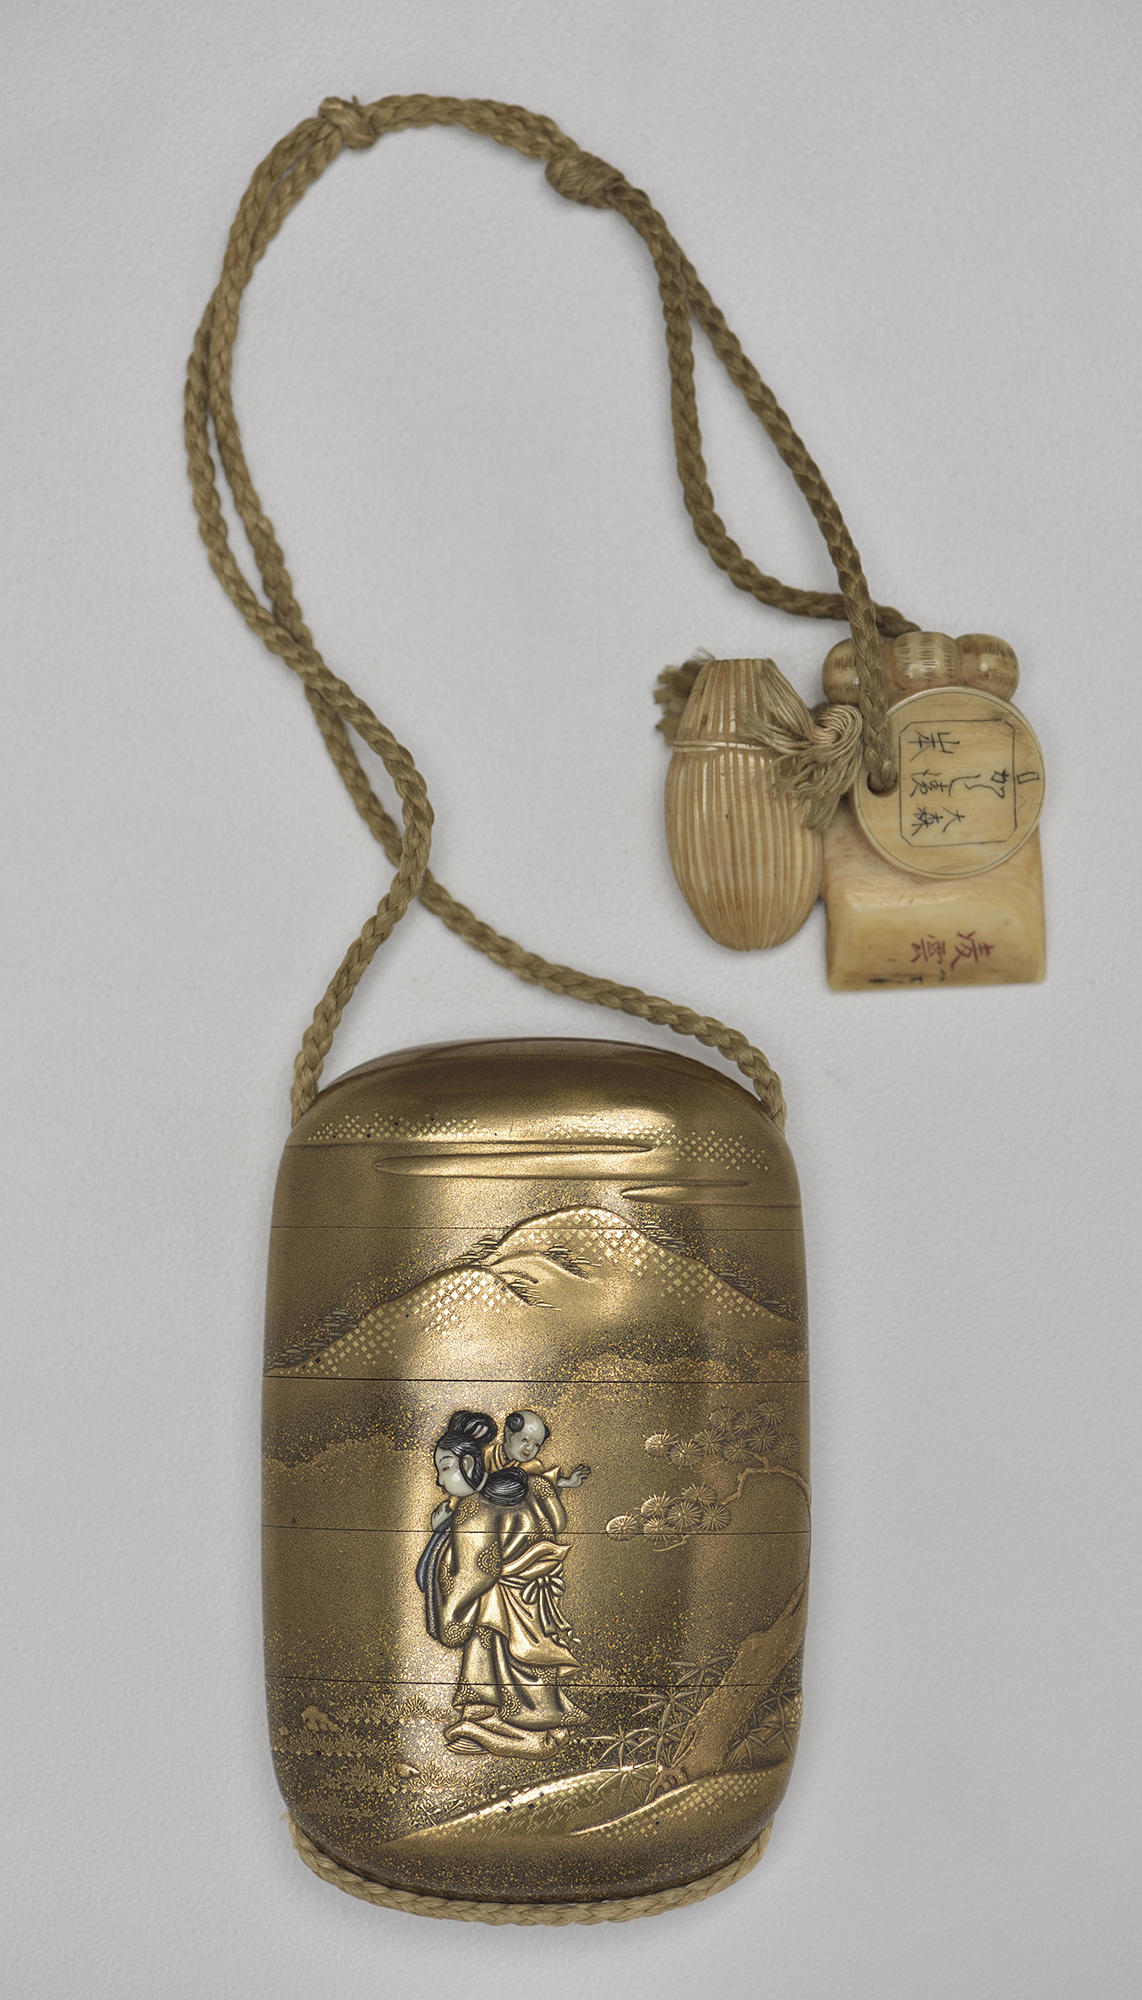 After Kajikawa, Yoshiro (active Kyoto, 19th century), Medicine Case (Inrō): Scene Of Kuo Chü, late 19th century. Lacquered wood with gold and ivory decoration and ivory netsuke